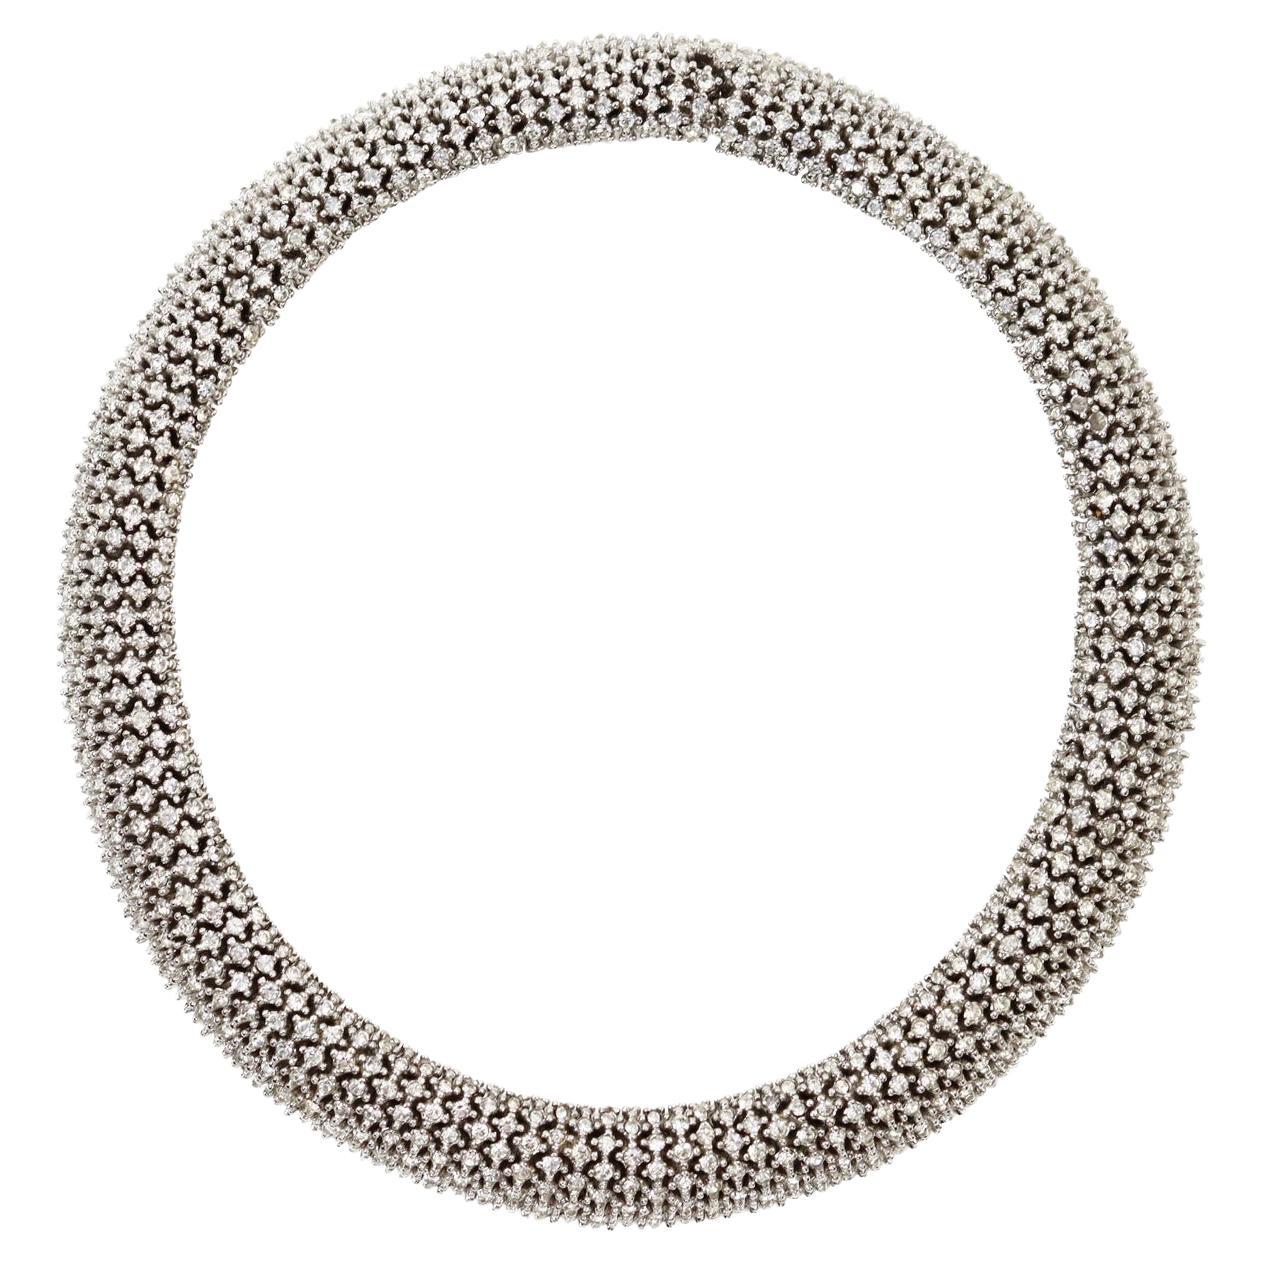 Vintage Ciner Silver Tone Diamante Rounded Choker Necklace Circa 1980s For Sale